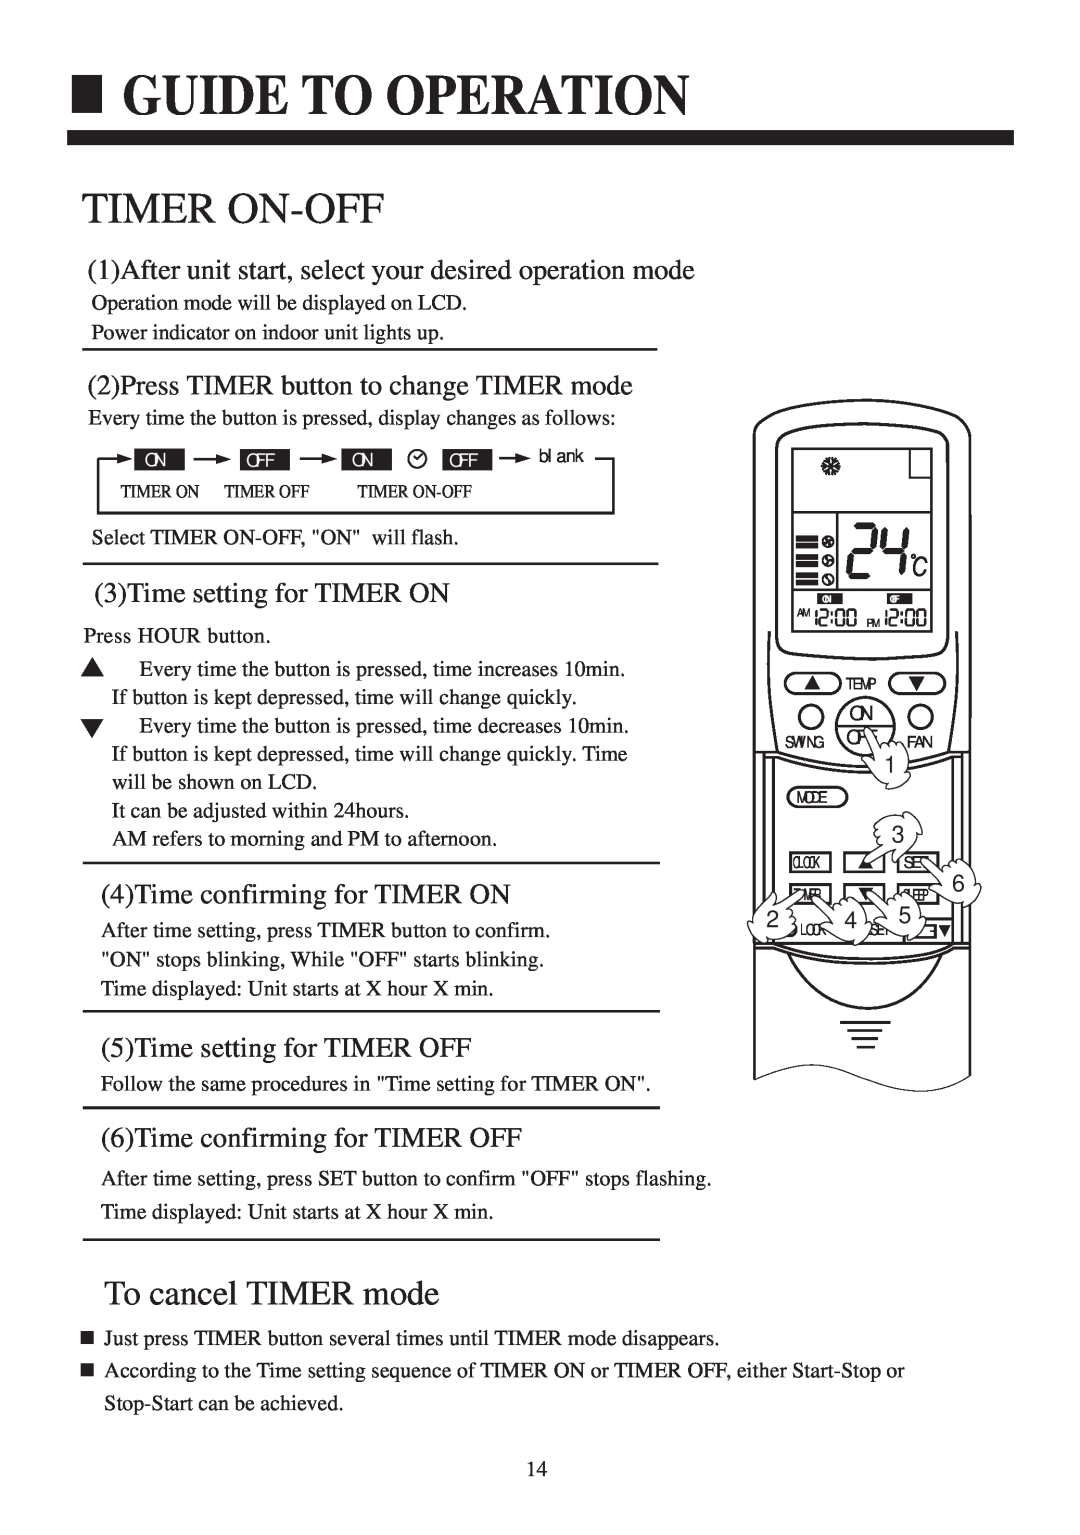 Haier HCFU-18C13 Timer On-Off, 1After unit start, select your desired operation mode, 3Time setting for TIMER ON 